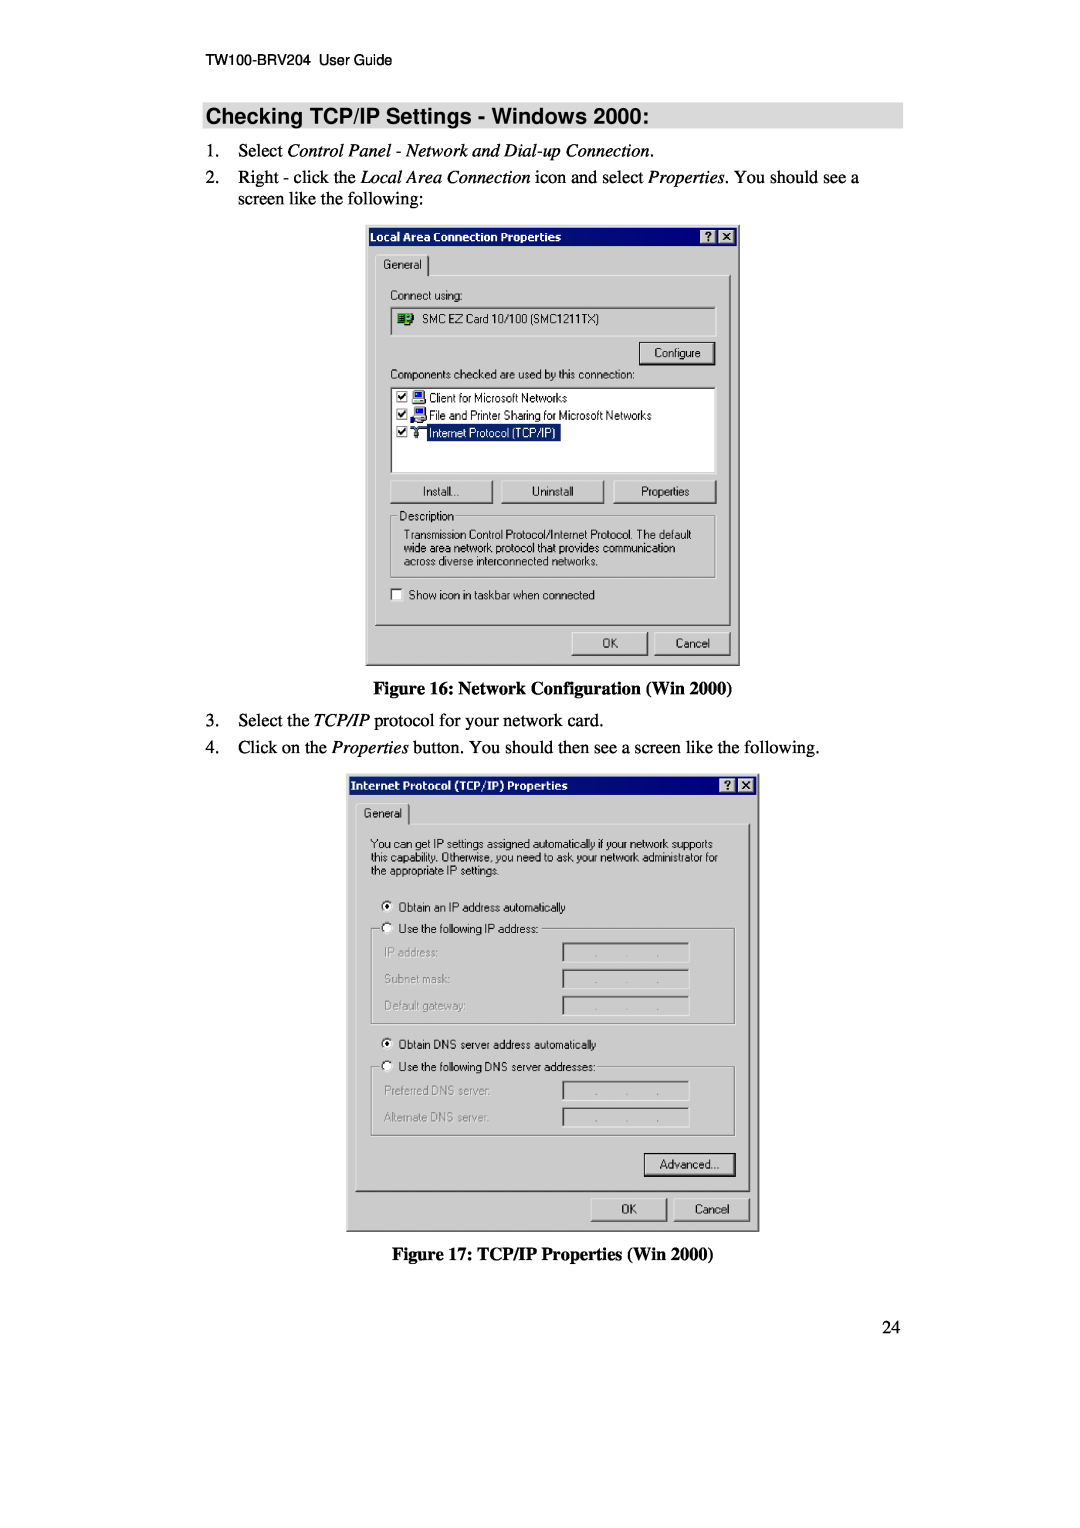 TRENDnet BRV204 manual Checking TCP/IP Settings - Windows, Select Control Panel - Network and Dial-up Connection 